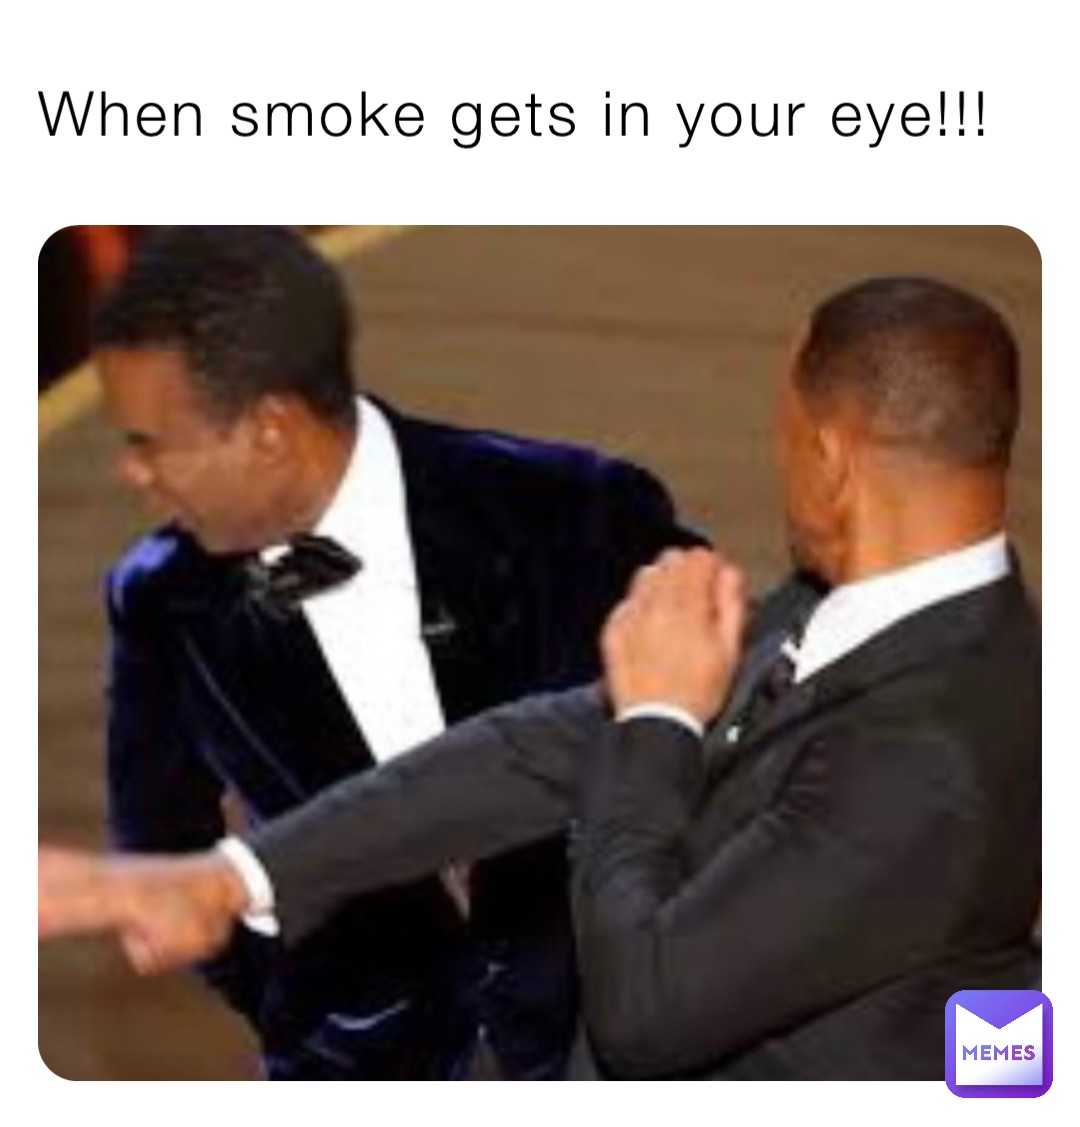 When smoke gets in your eye!!!